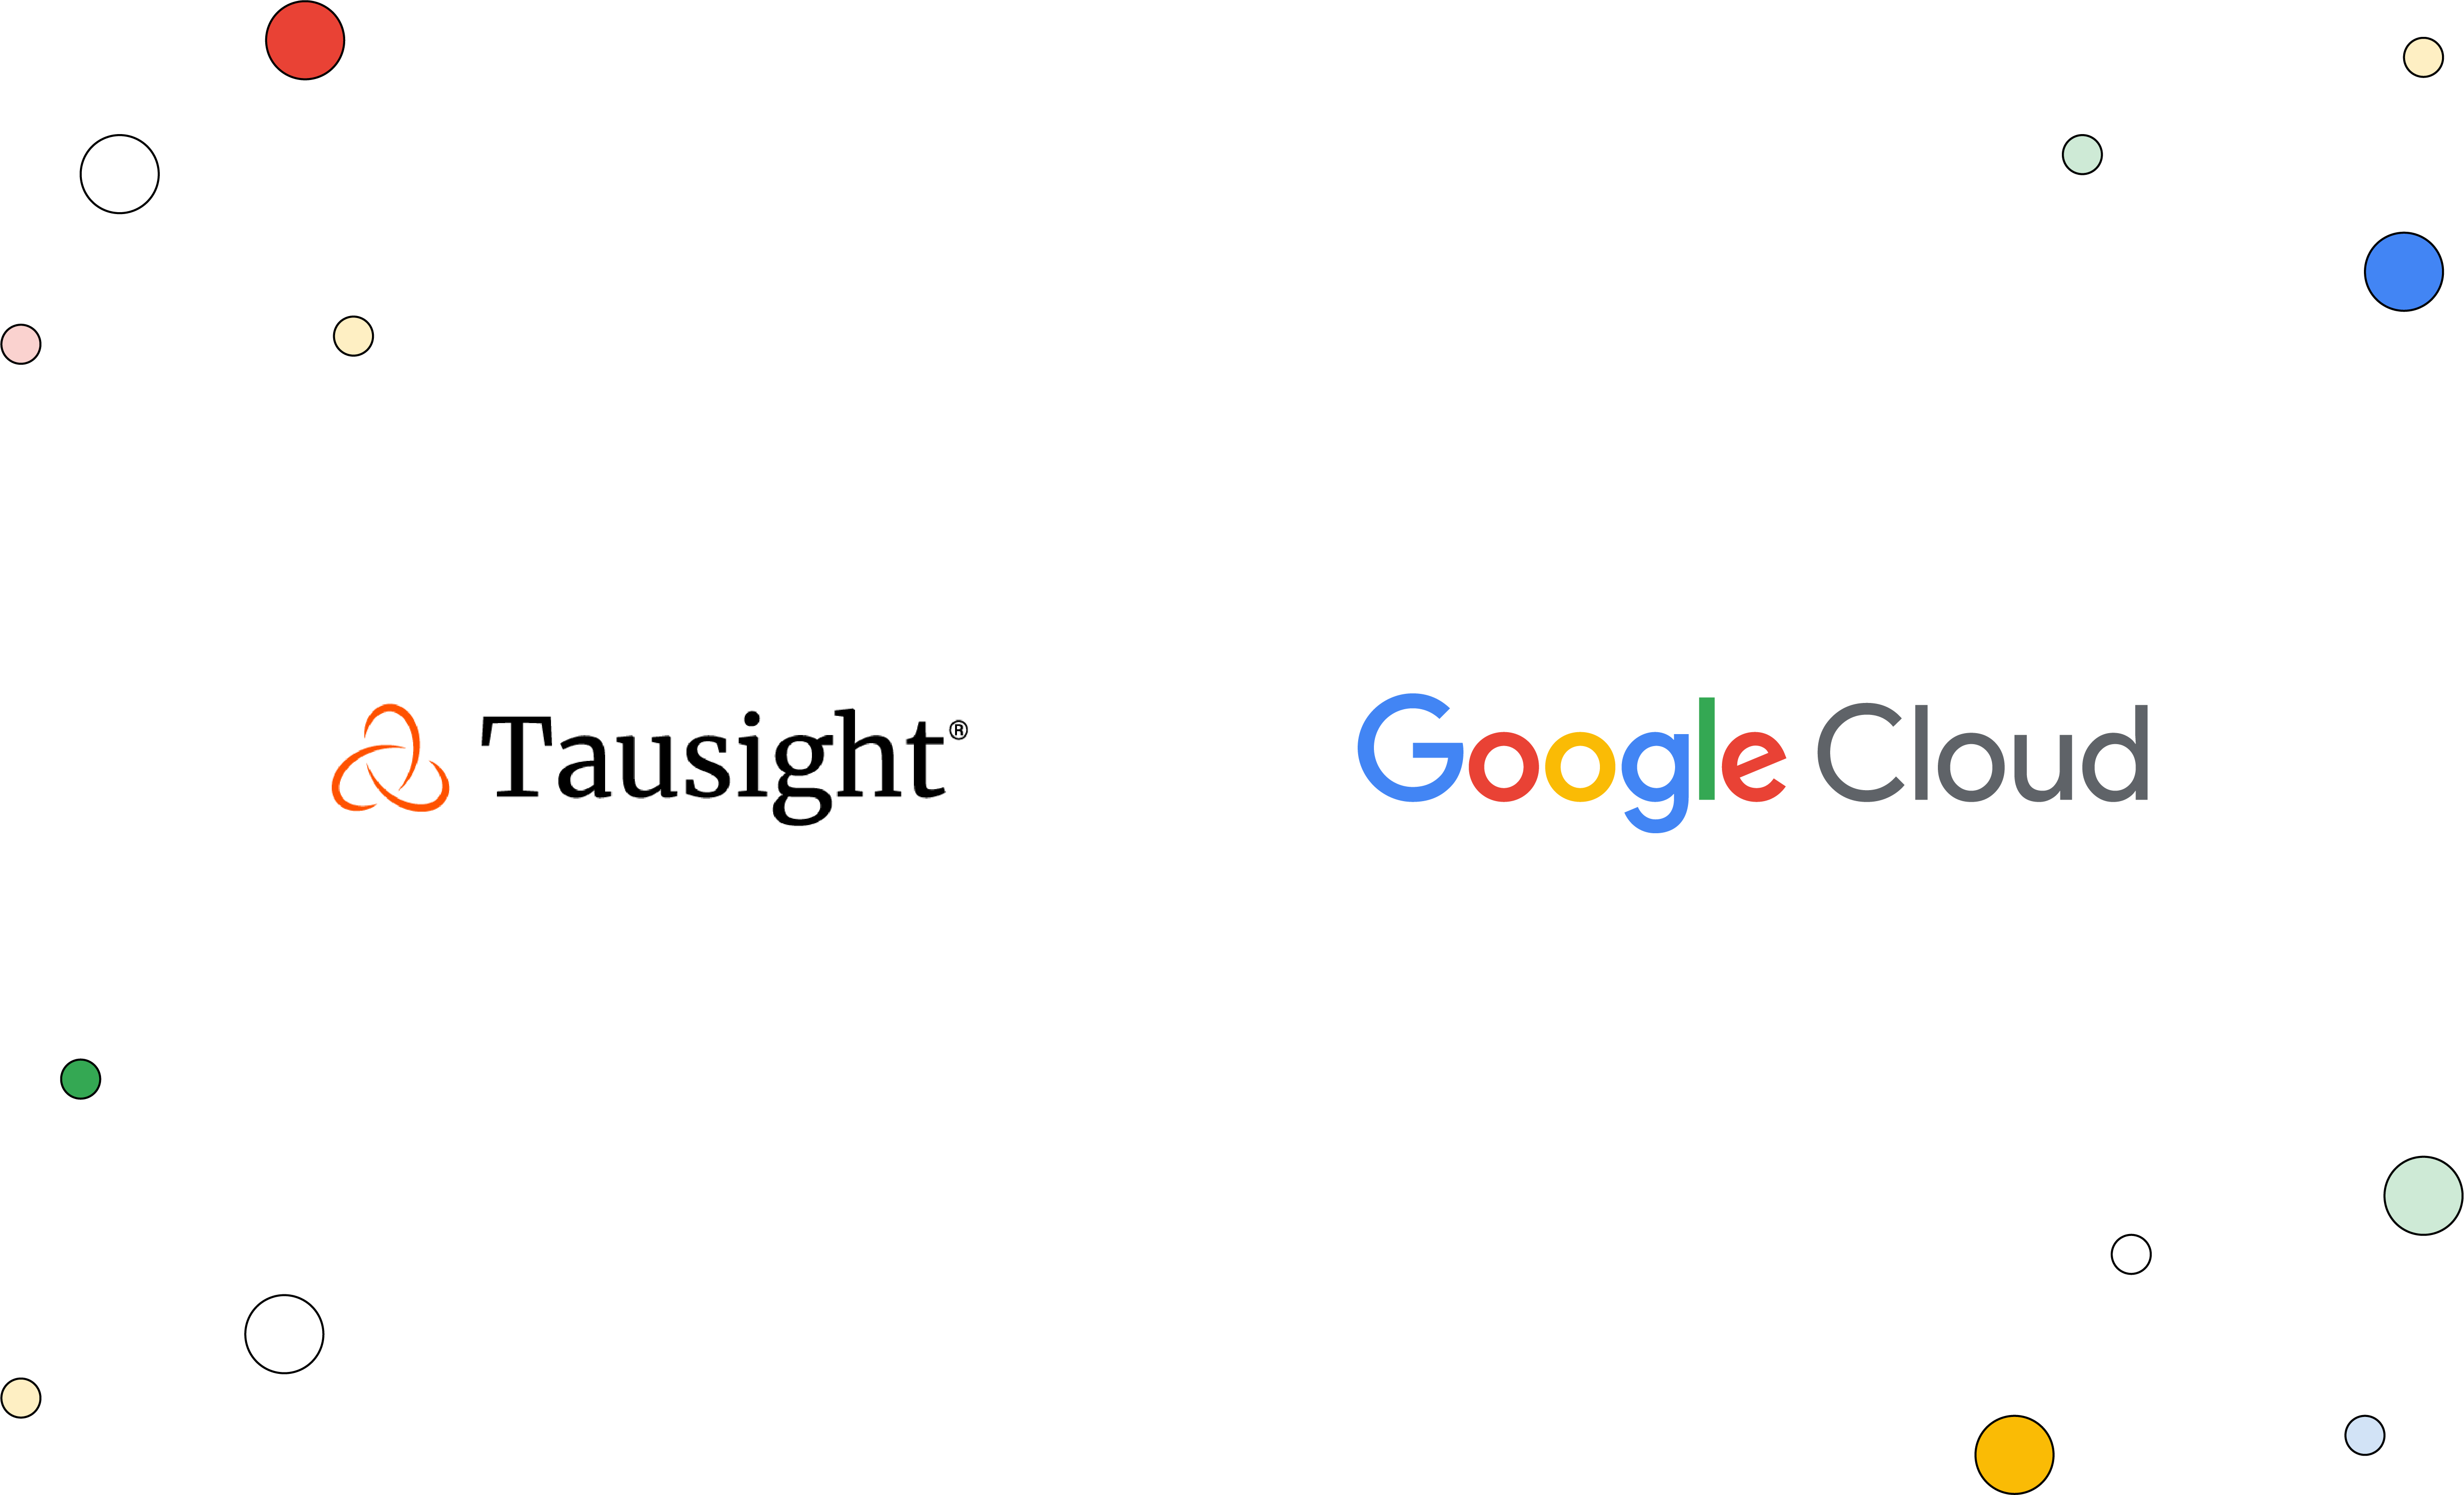 Tausight partners with Google helping the healthcare industry protect PHI activity and take action.